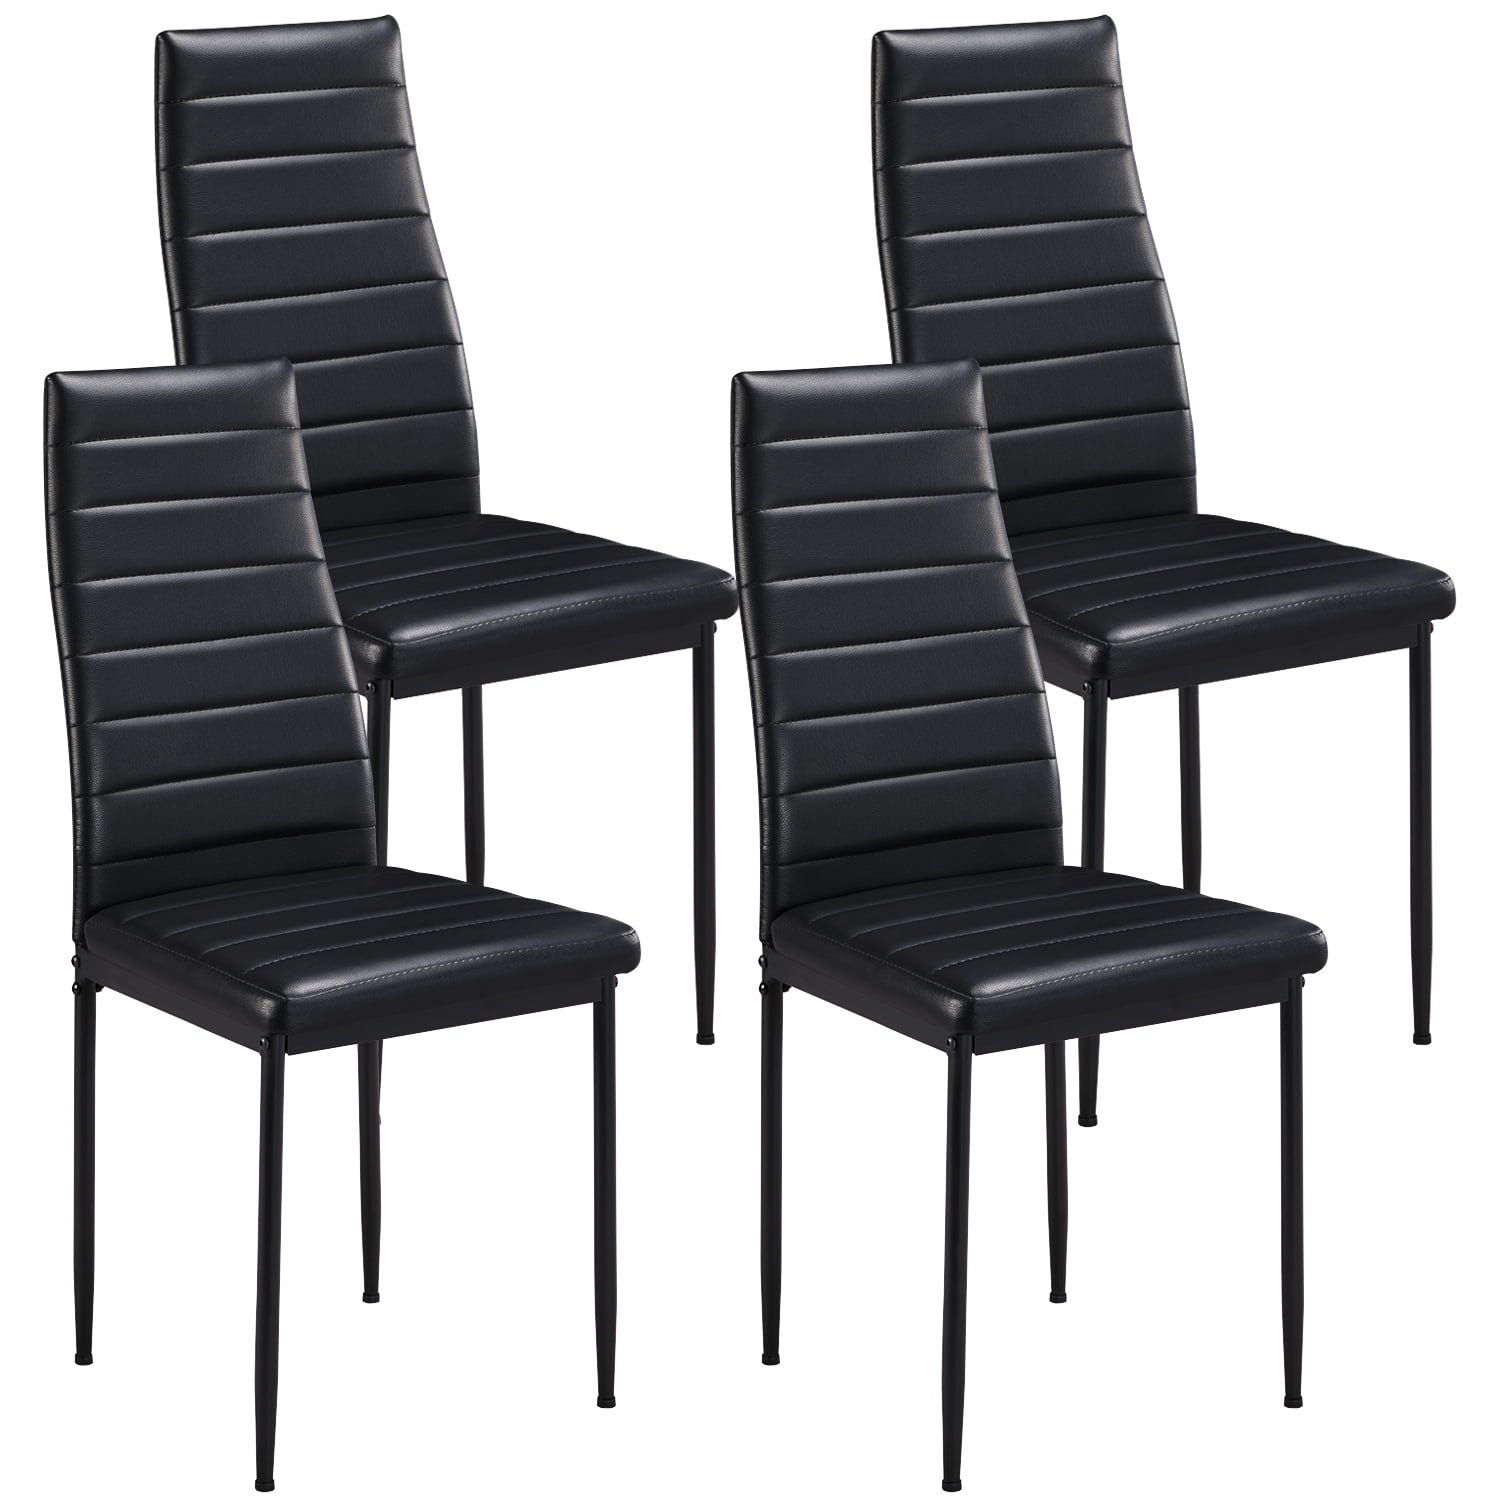 SmileMart Modern Upholstered Dining Chair with High Back Faux Leather